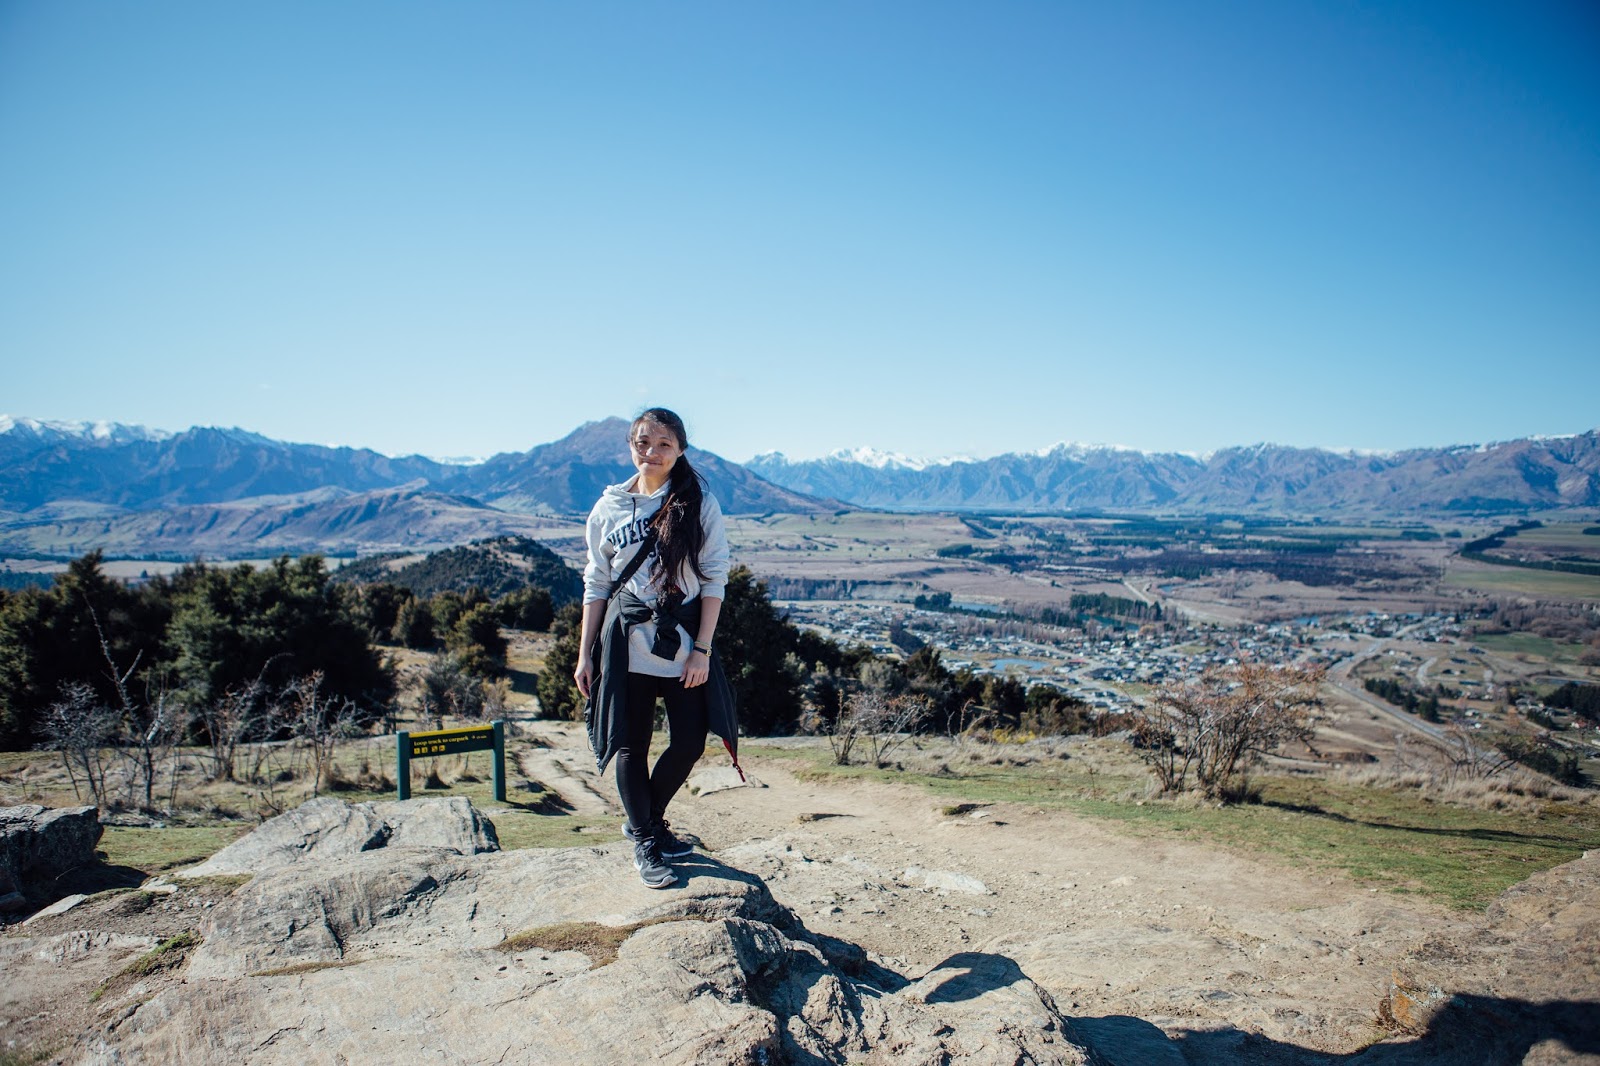 new zealand solo trip cost